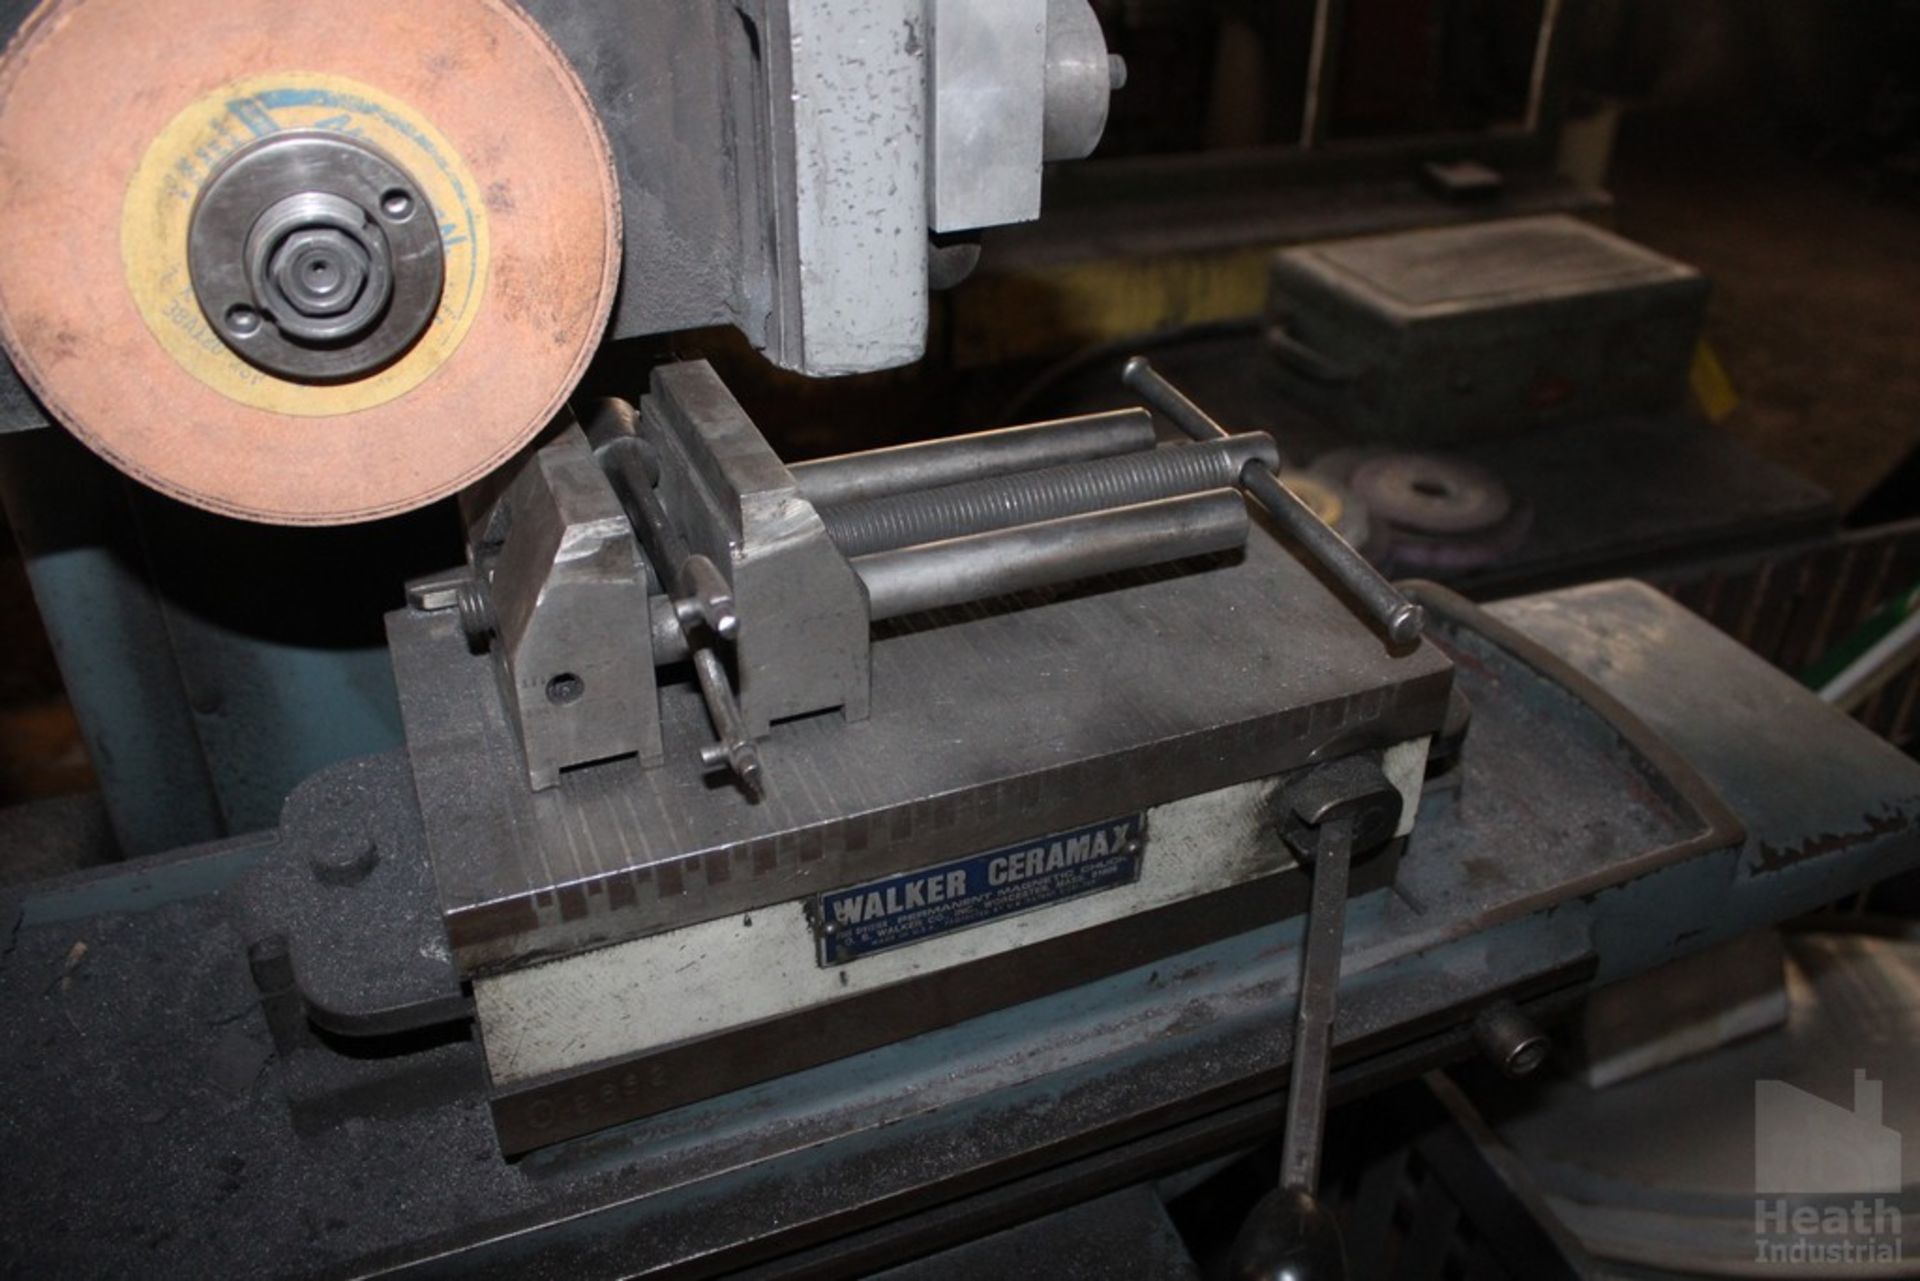 HARIG 6” x 12” MODEL SUPER 612 SURFACE GRINDER, S/N 5171, WITH PERMANENT MAGNETIC CHUCK - Image 4 of 5